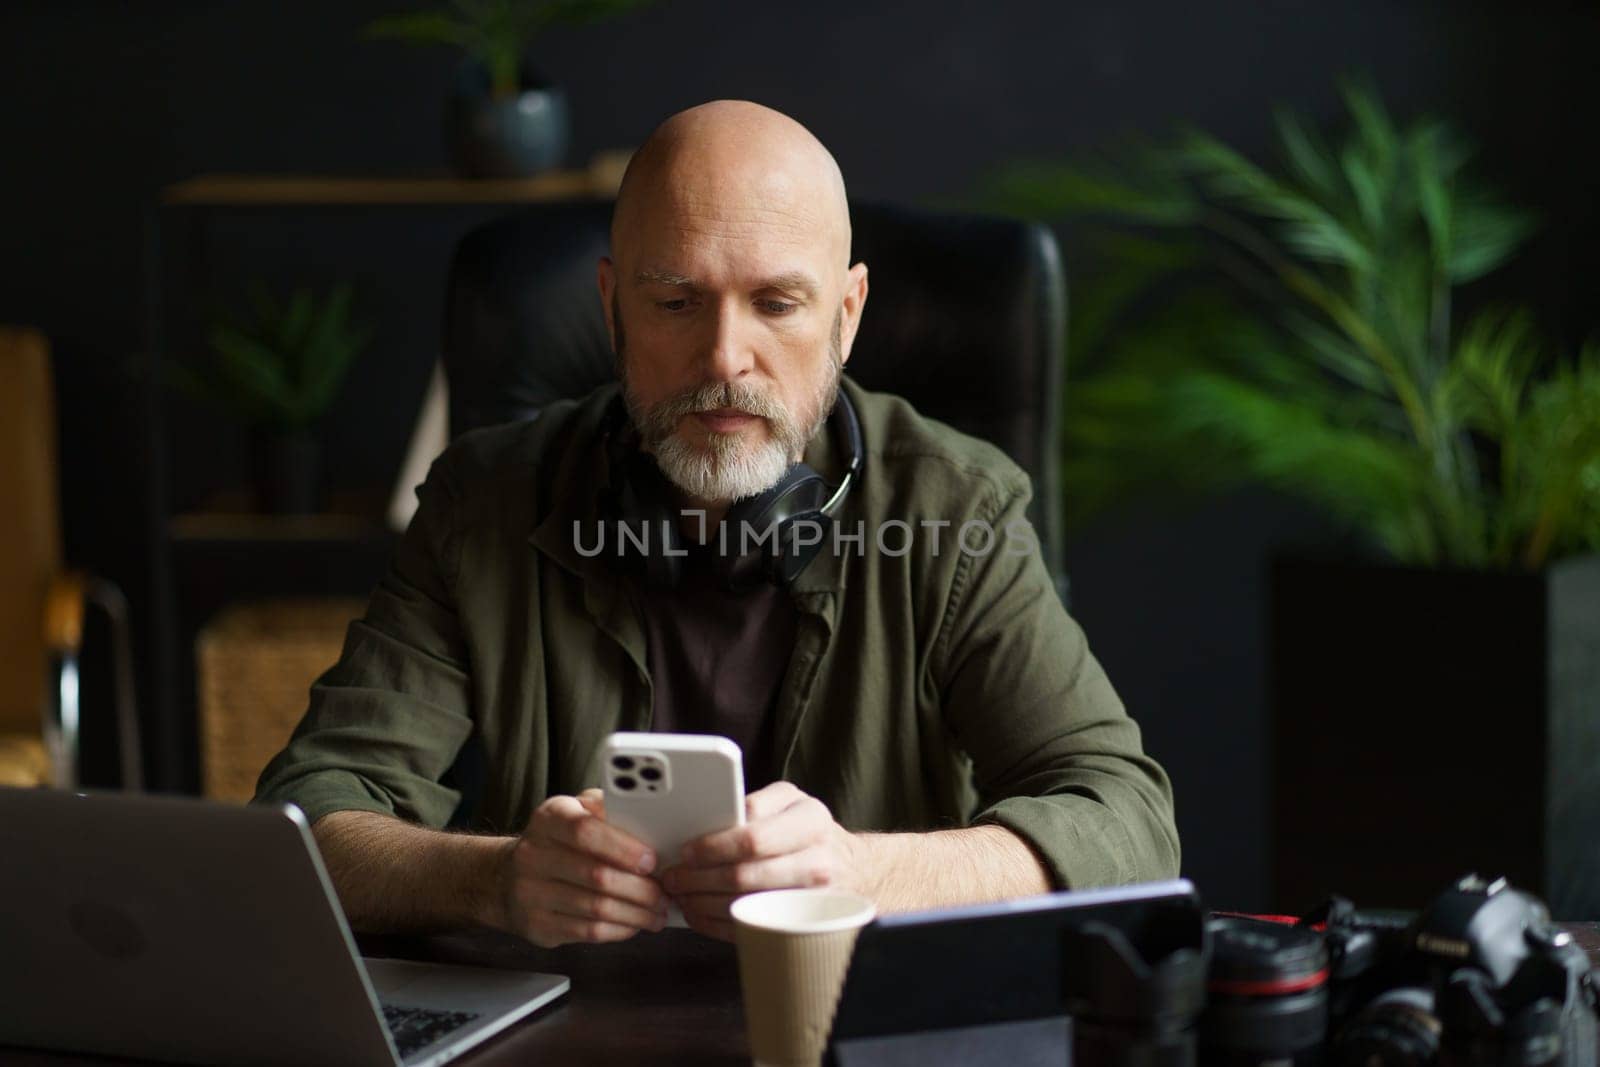 Modern lifestyle of individuals who work remotely or from comfort of own homes. Mature man multitasking at home. He texting message on phone while also working on computer. . High quality photo